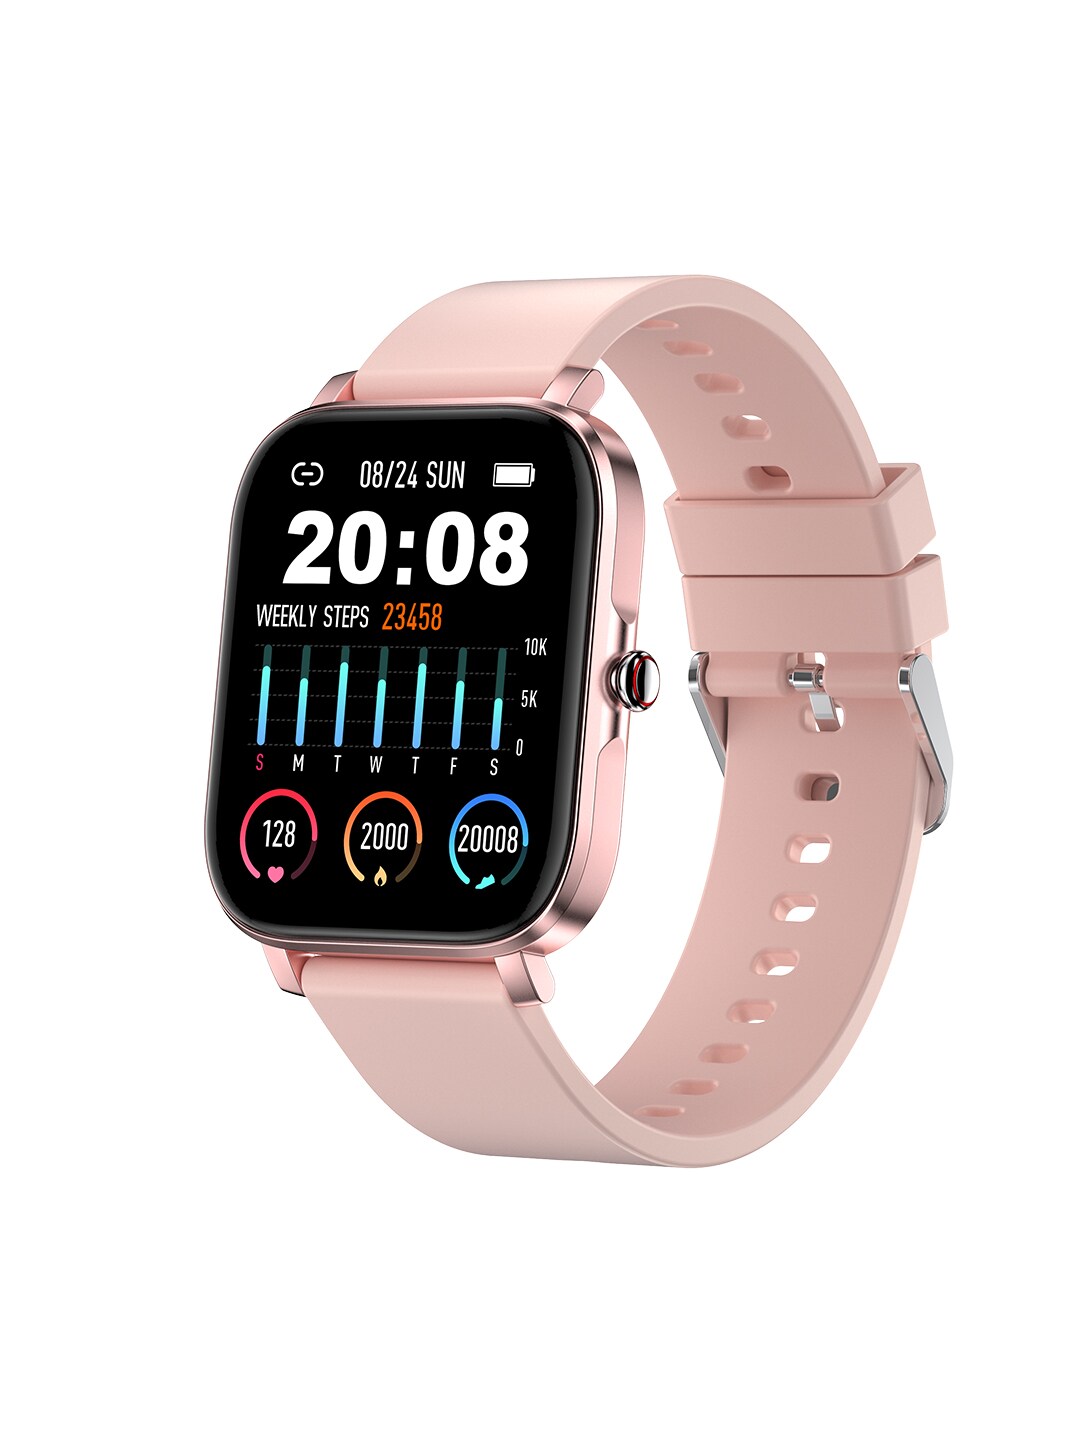 Fire-Boltt Ninja 2 Plus Ultra-Thin Smartwatch - Pink 31BSWAAY Price in India